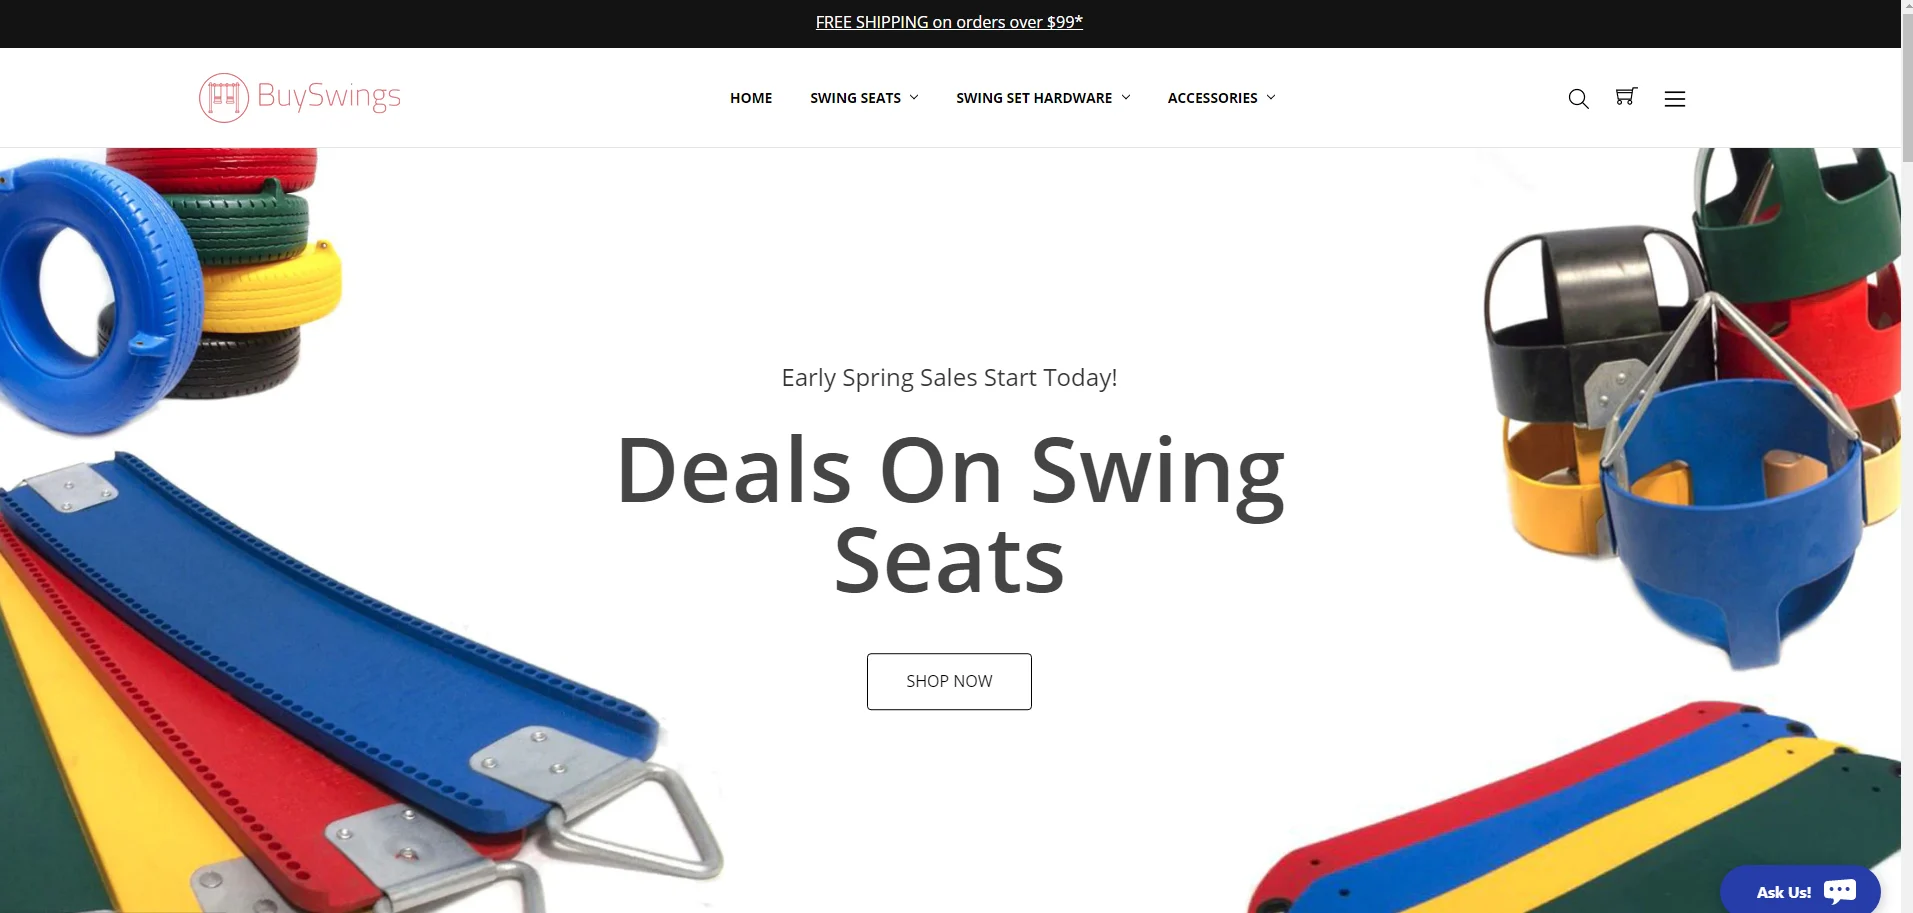 https://www-cdn.bigcommerce.com/assets/icp-test-page-b2b-ecommerce-category-buyswings.png